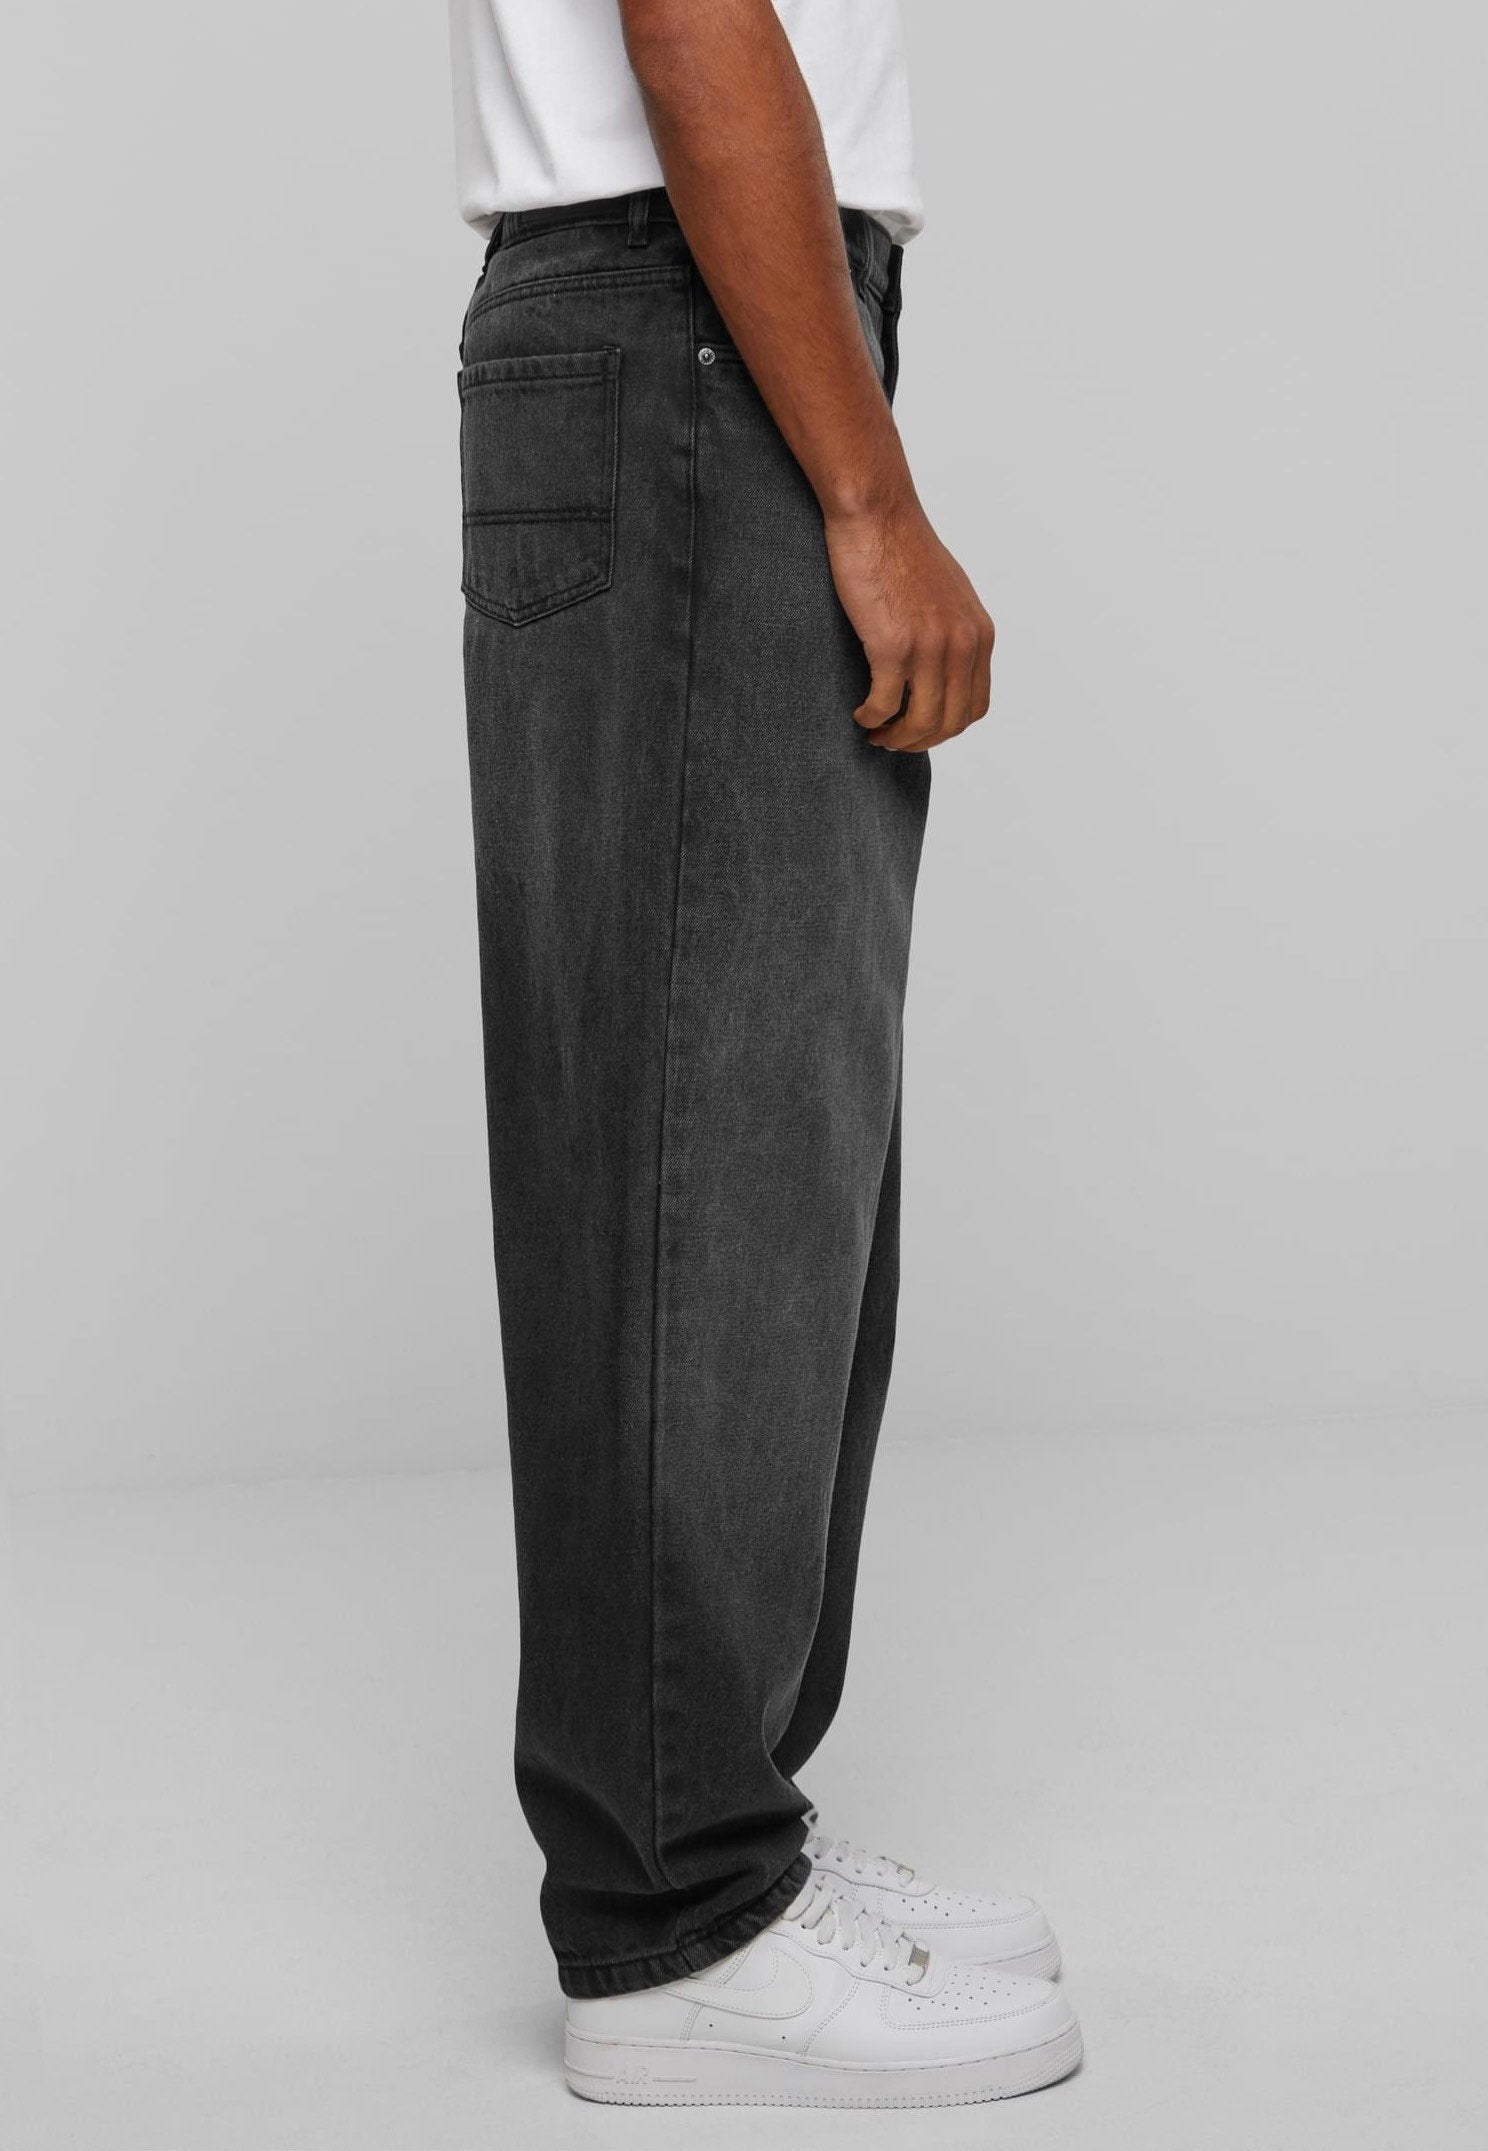 Urban Classics - Heavy Ounce Baggy Fit Black Washed - Jeans